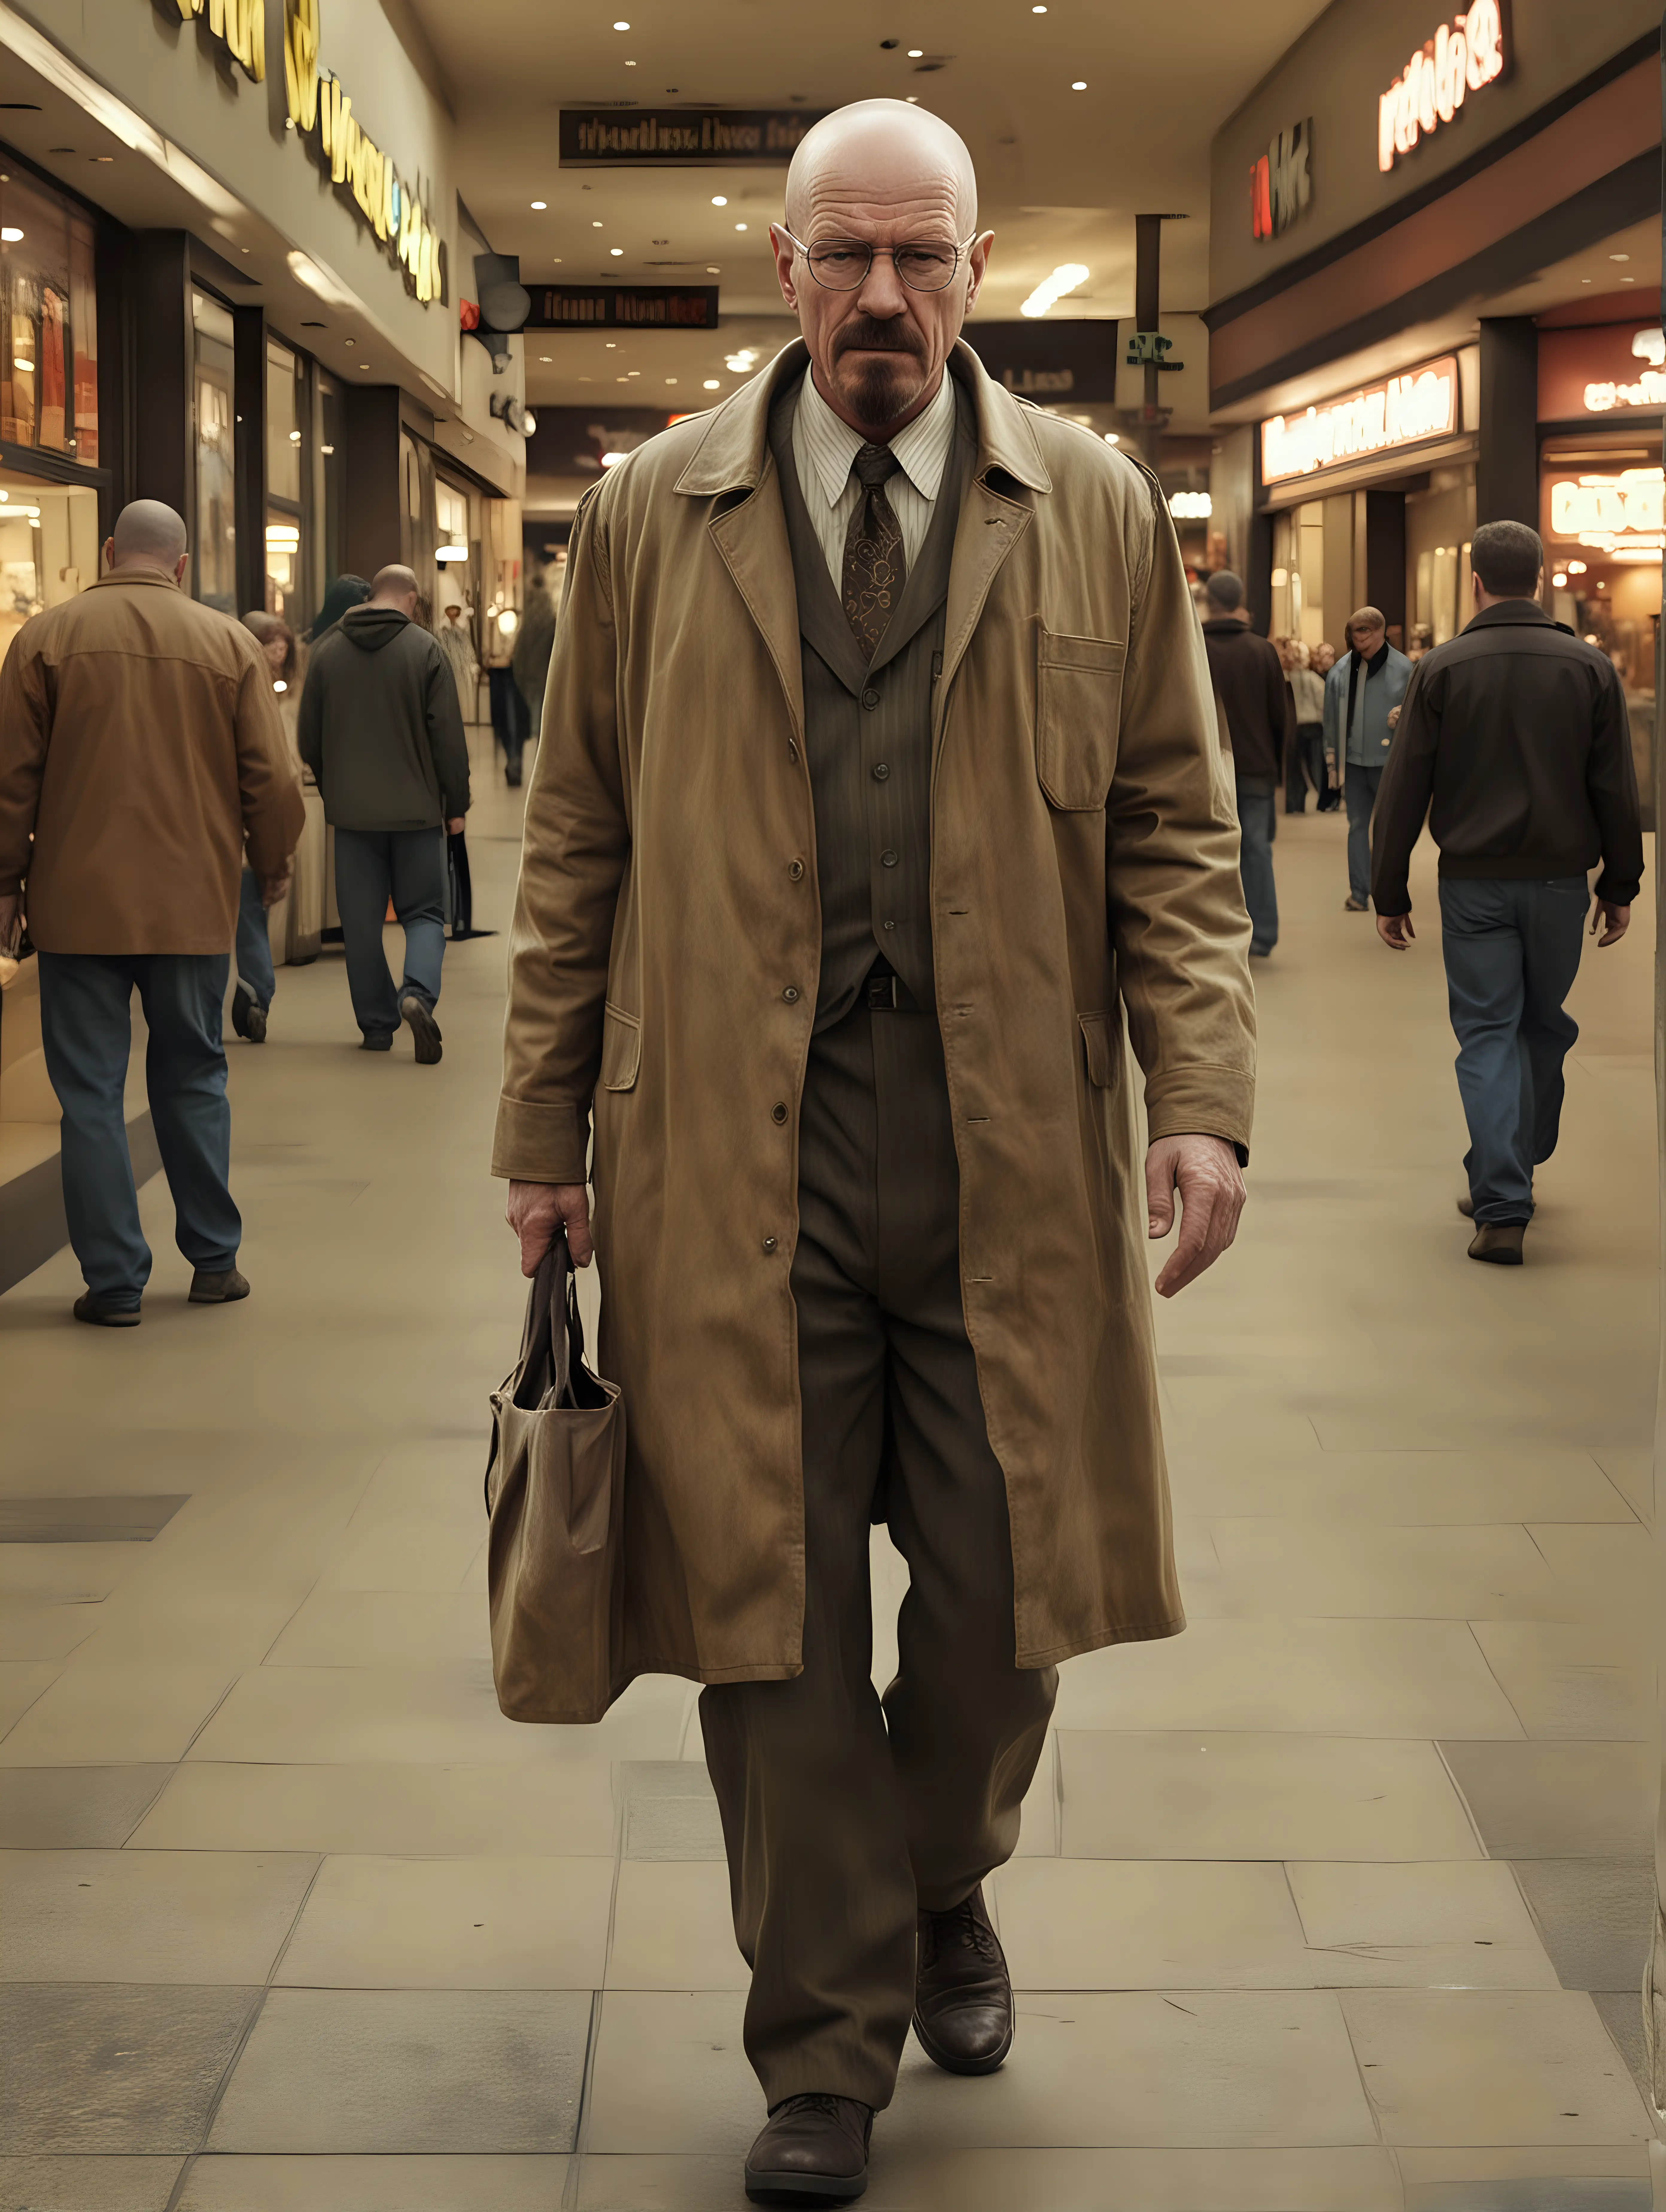 Realistic-Walter White-Walking-in-2009s-mall-Retro-Gangster